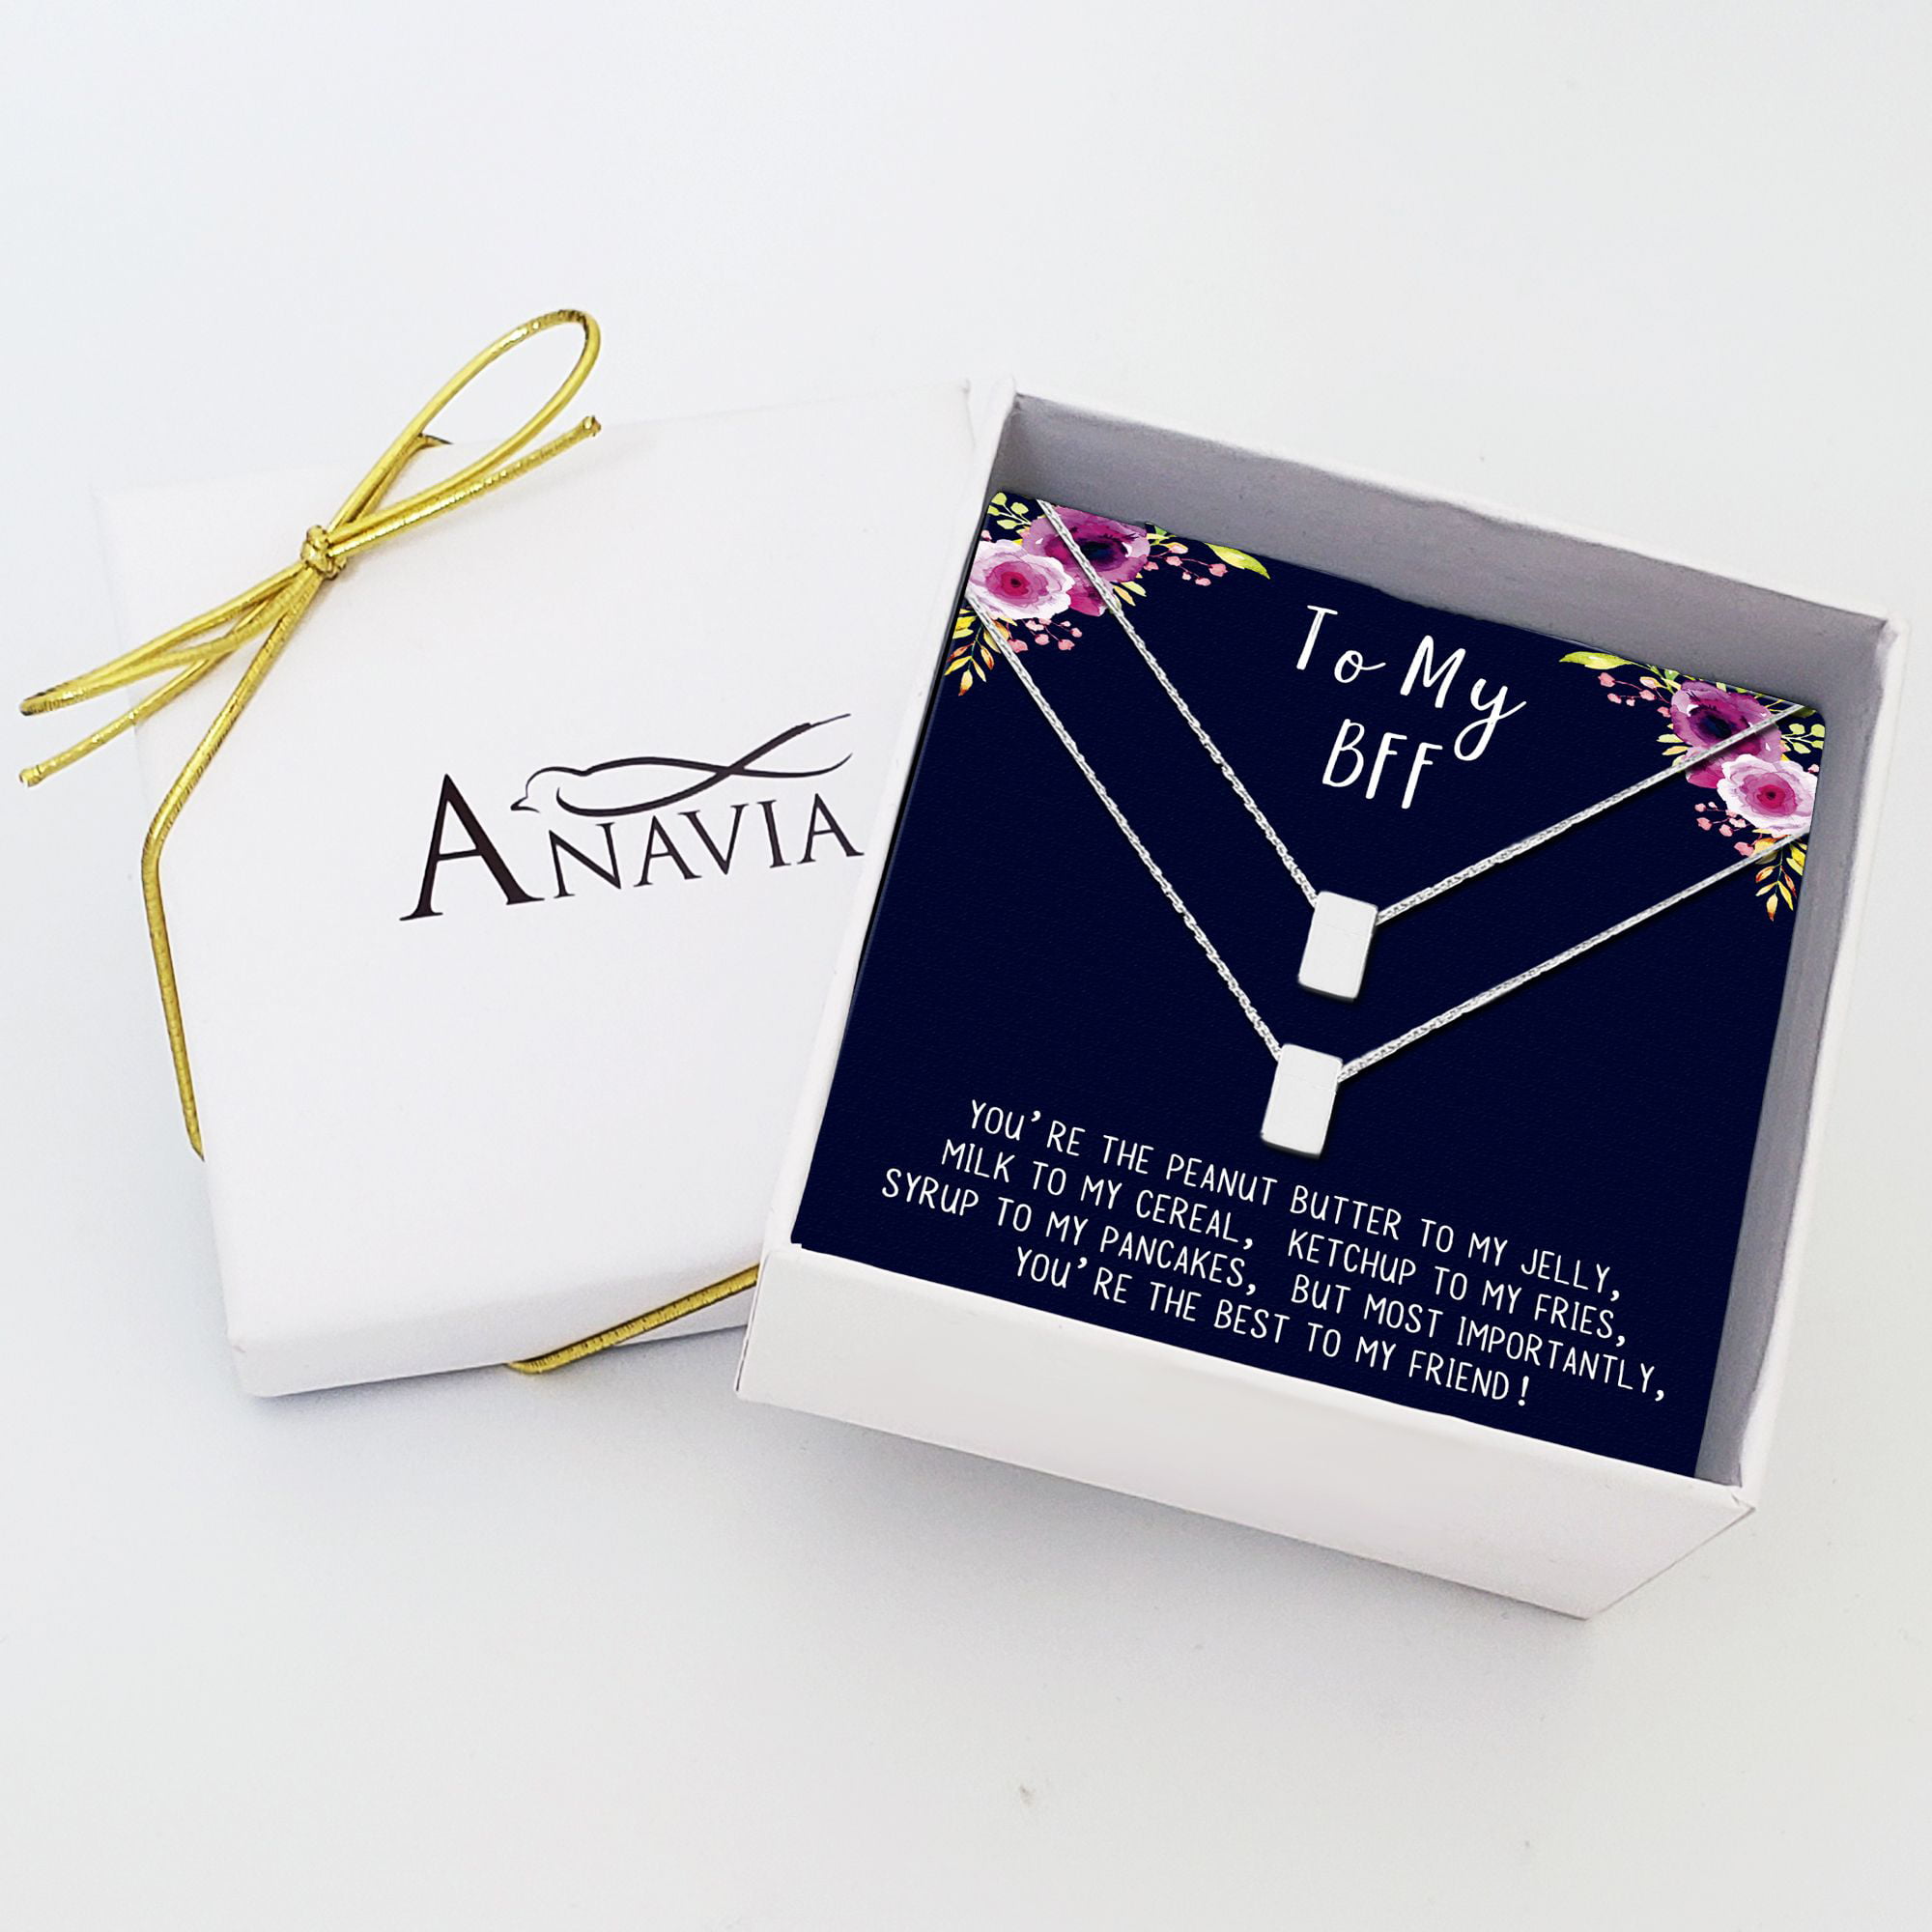 Anavia Best Friend Necklace, Friendship Jewelry, Best Friend Gifts, Gift  for Friend, Birthday Gift, Christmas Gift for Her, Cube Pendant Necklace  with